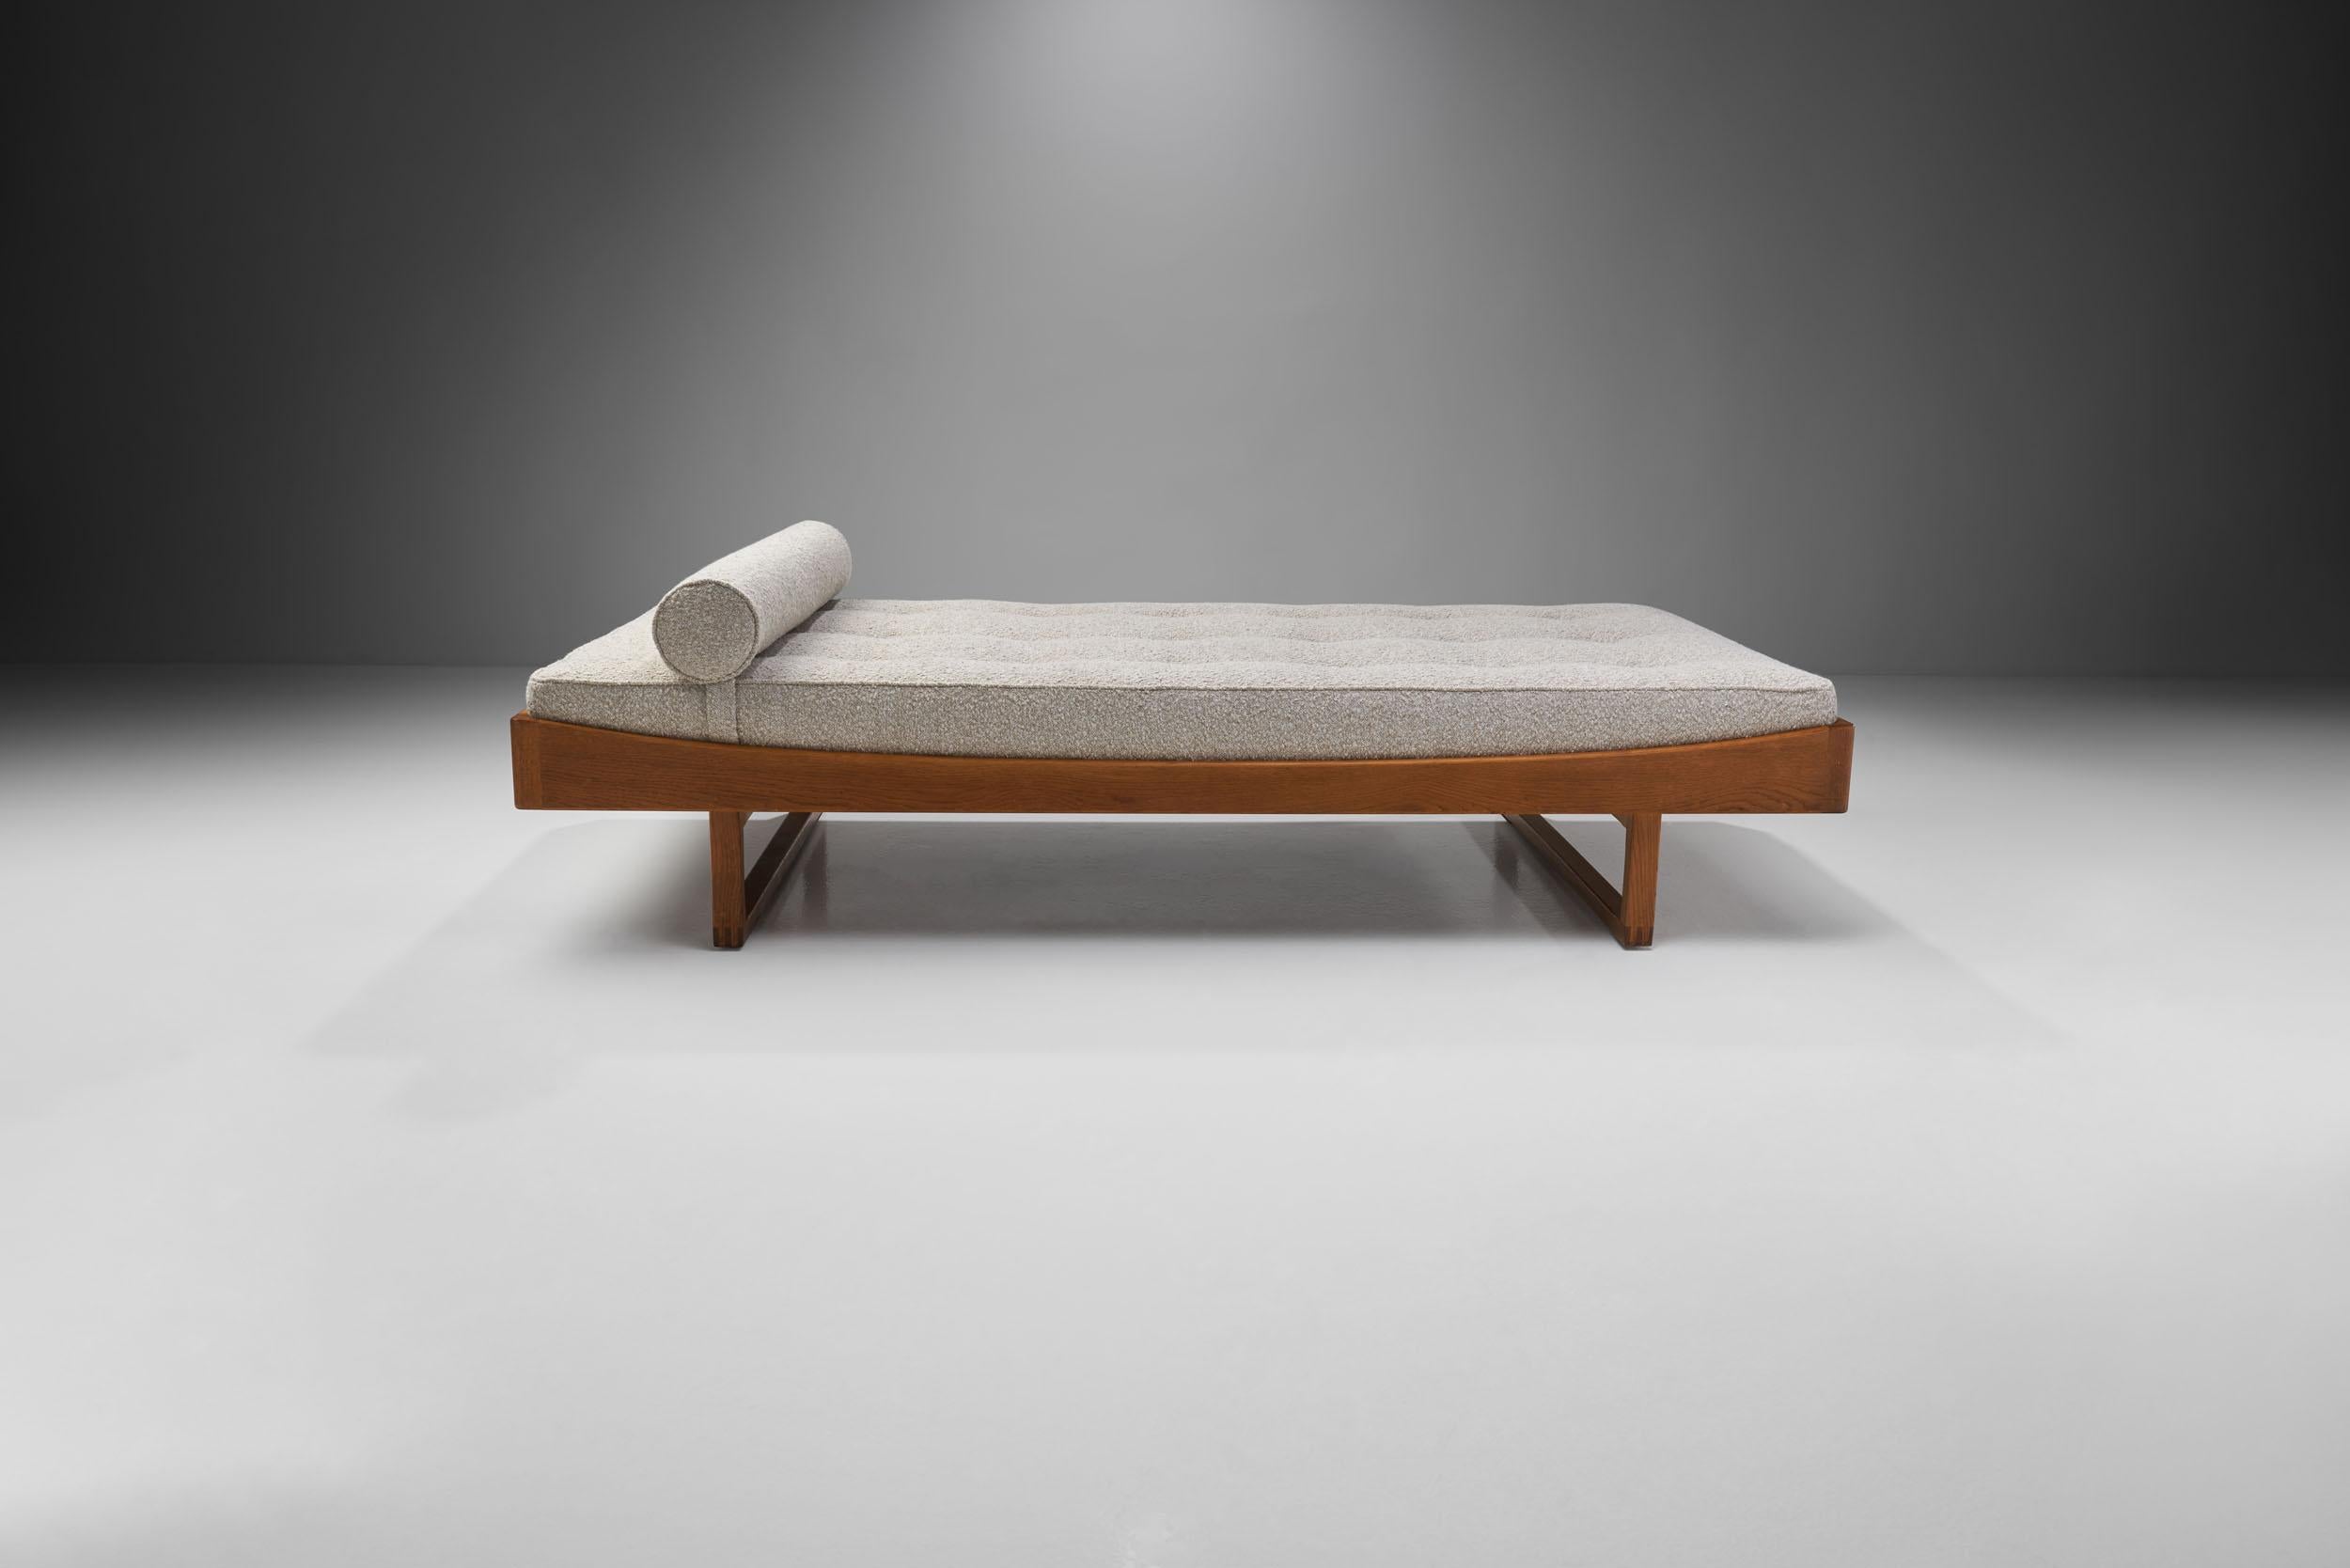 This gorgeous oak daybed model by the Danish furniture maker Bernhard Pedersen og Søn was inspired by Classic Danish furniture design and simplicity.

The streamlined solid wood frame features a curvy top and geometric, so-called runner legs. From